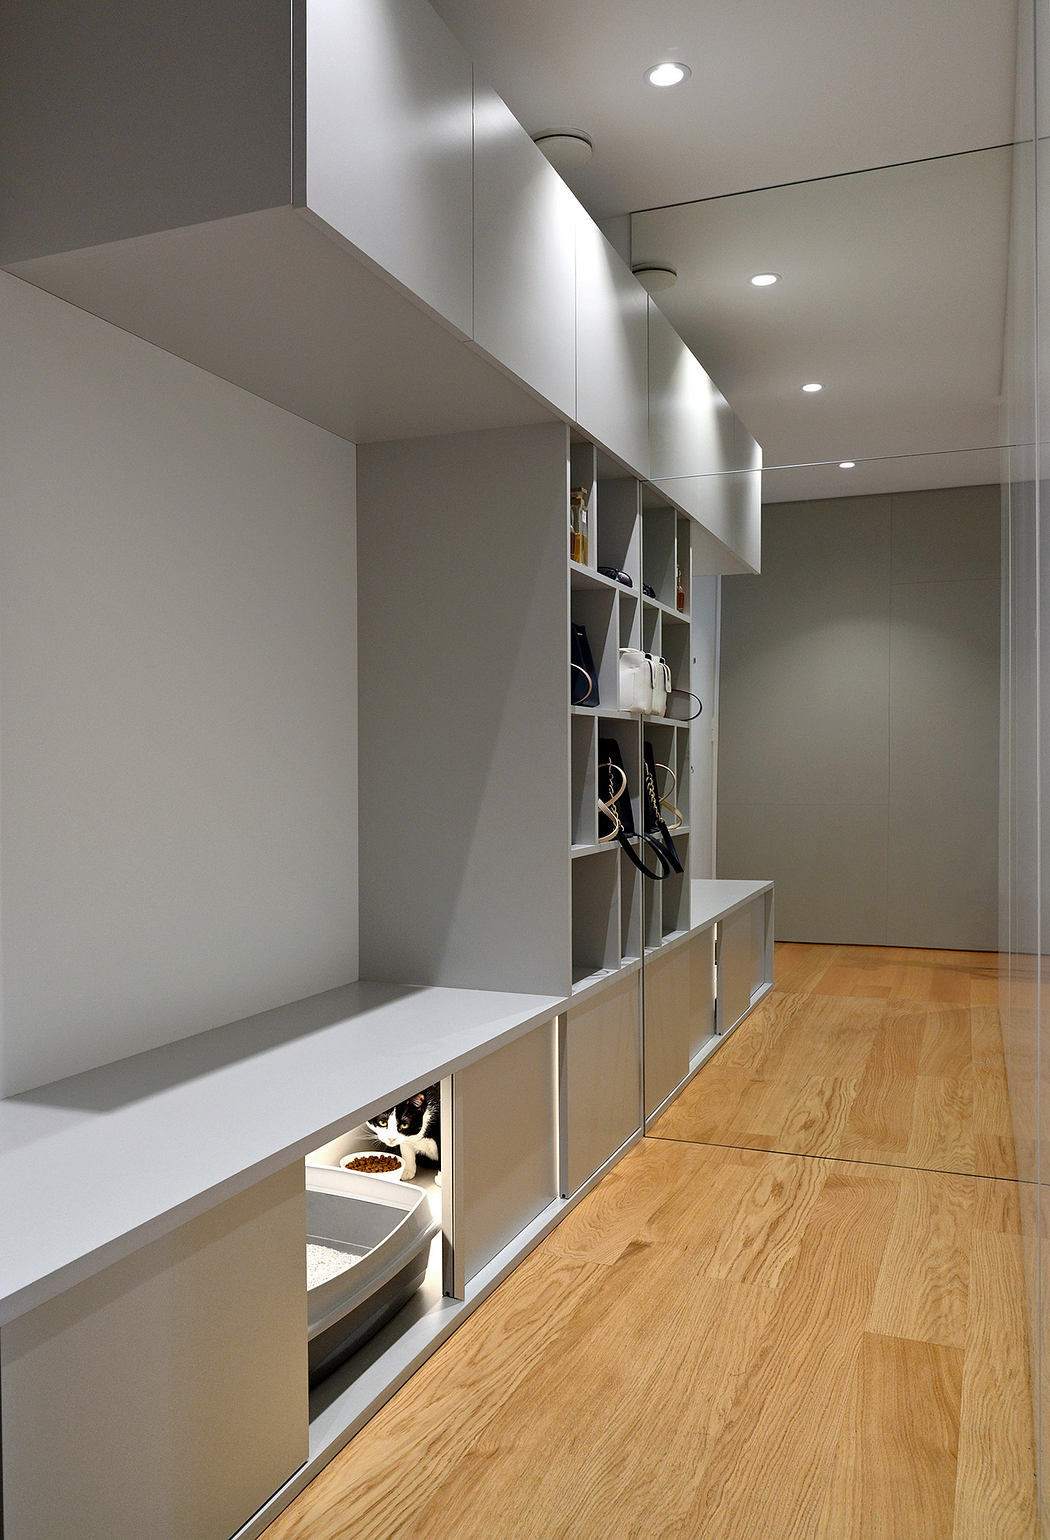 Modern hallway with sleek white cabinetry and wooden flooring.